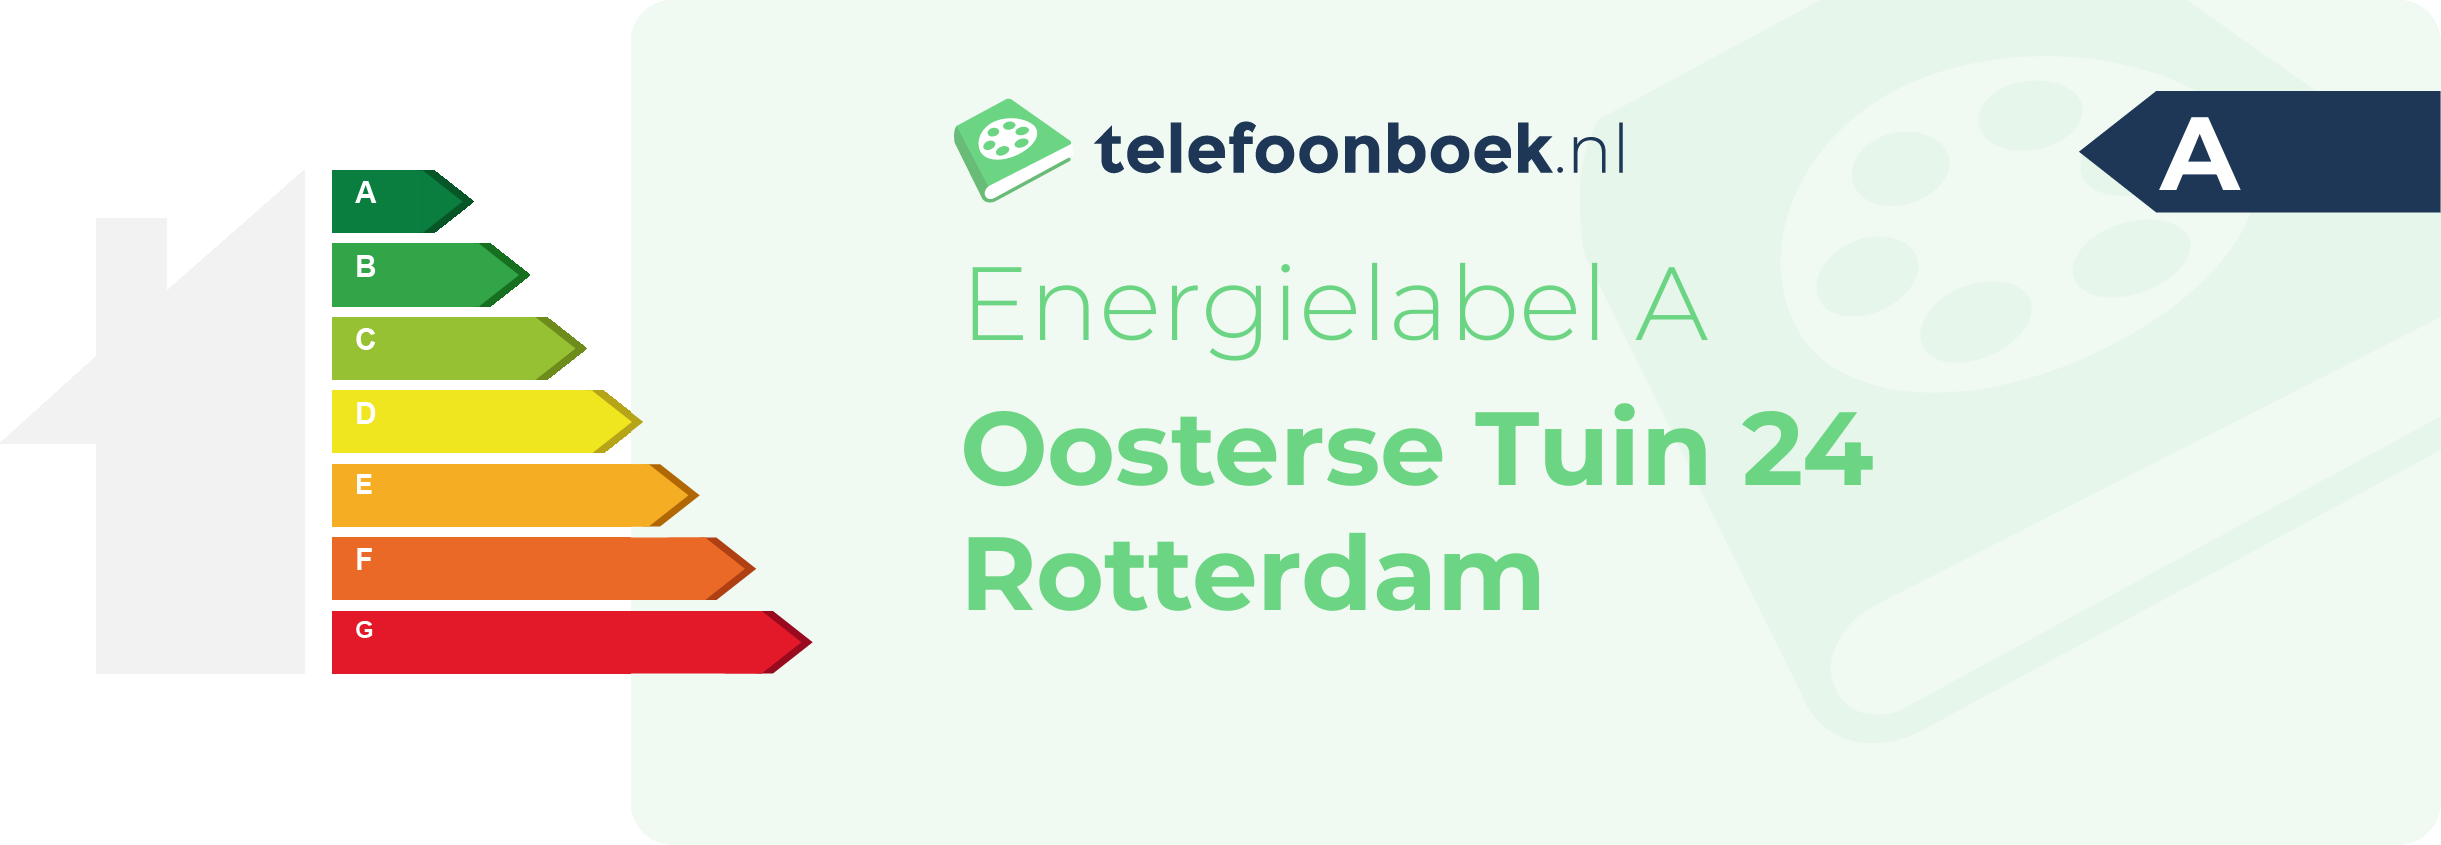 Energielabel Oosterse Tuin 24 Rotterdam